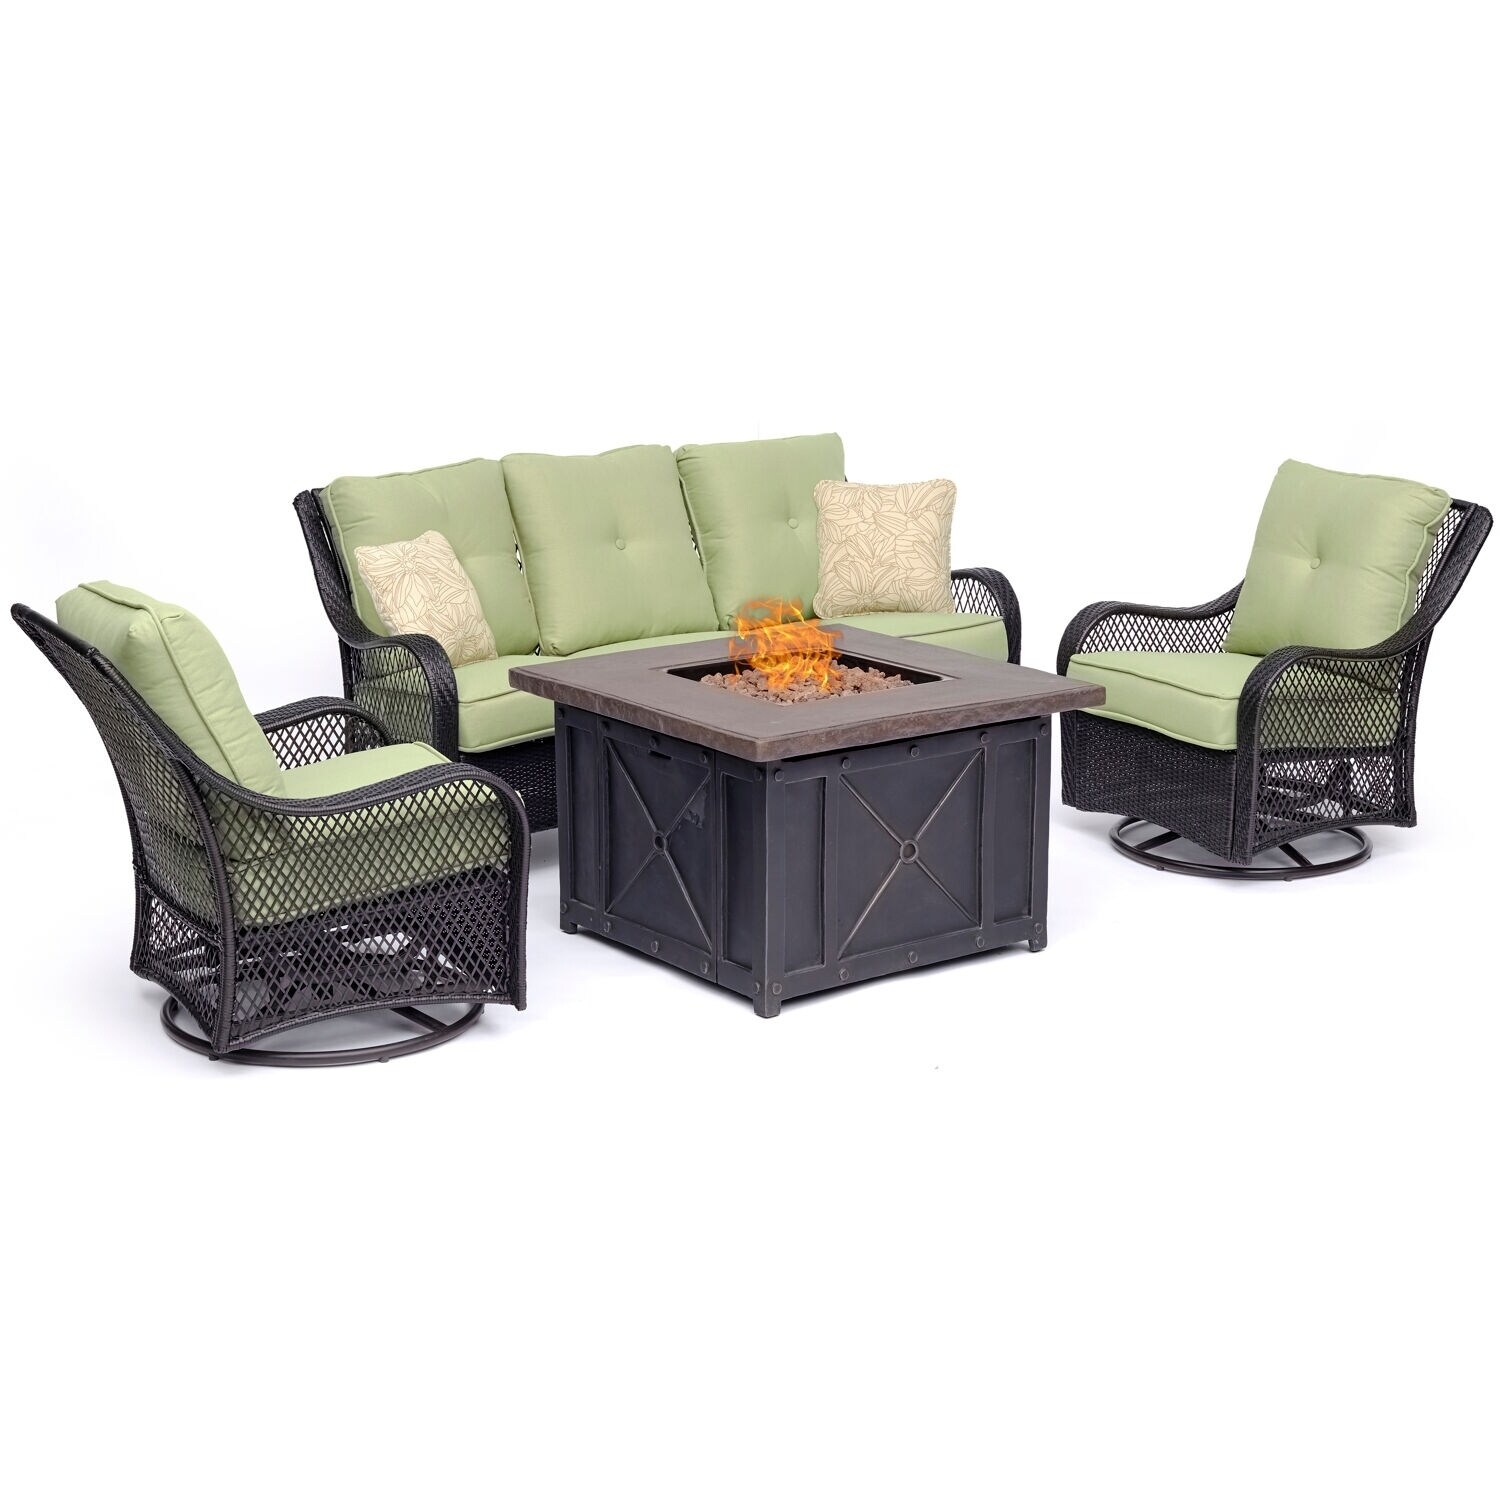 Hanover Orleans 4-piece Woven Fire Pit Lounge Set In Avocado Green With Sofa  2 Swivel Gliders And Durastone Fire Pit